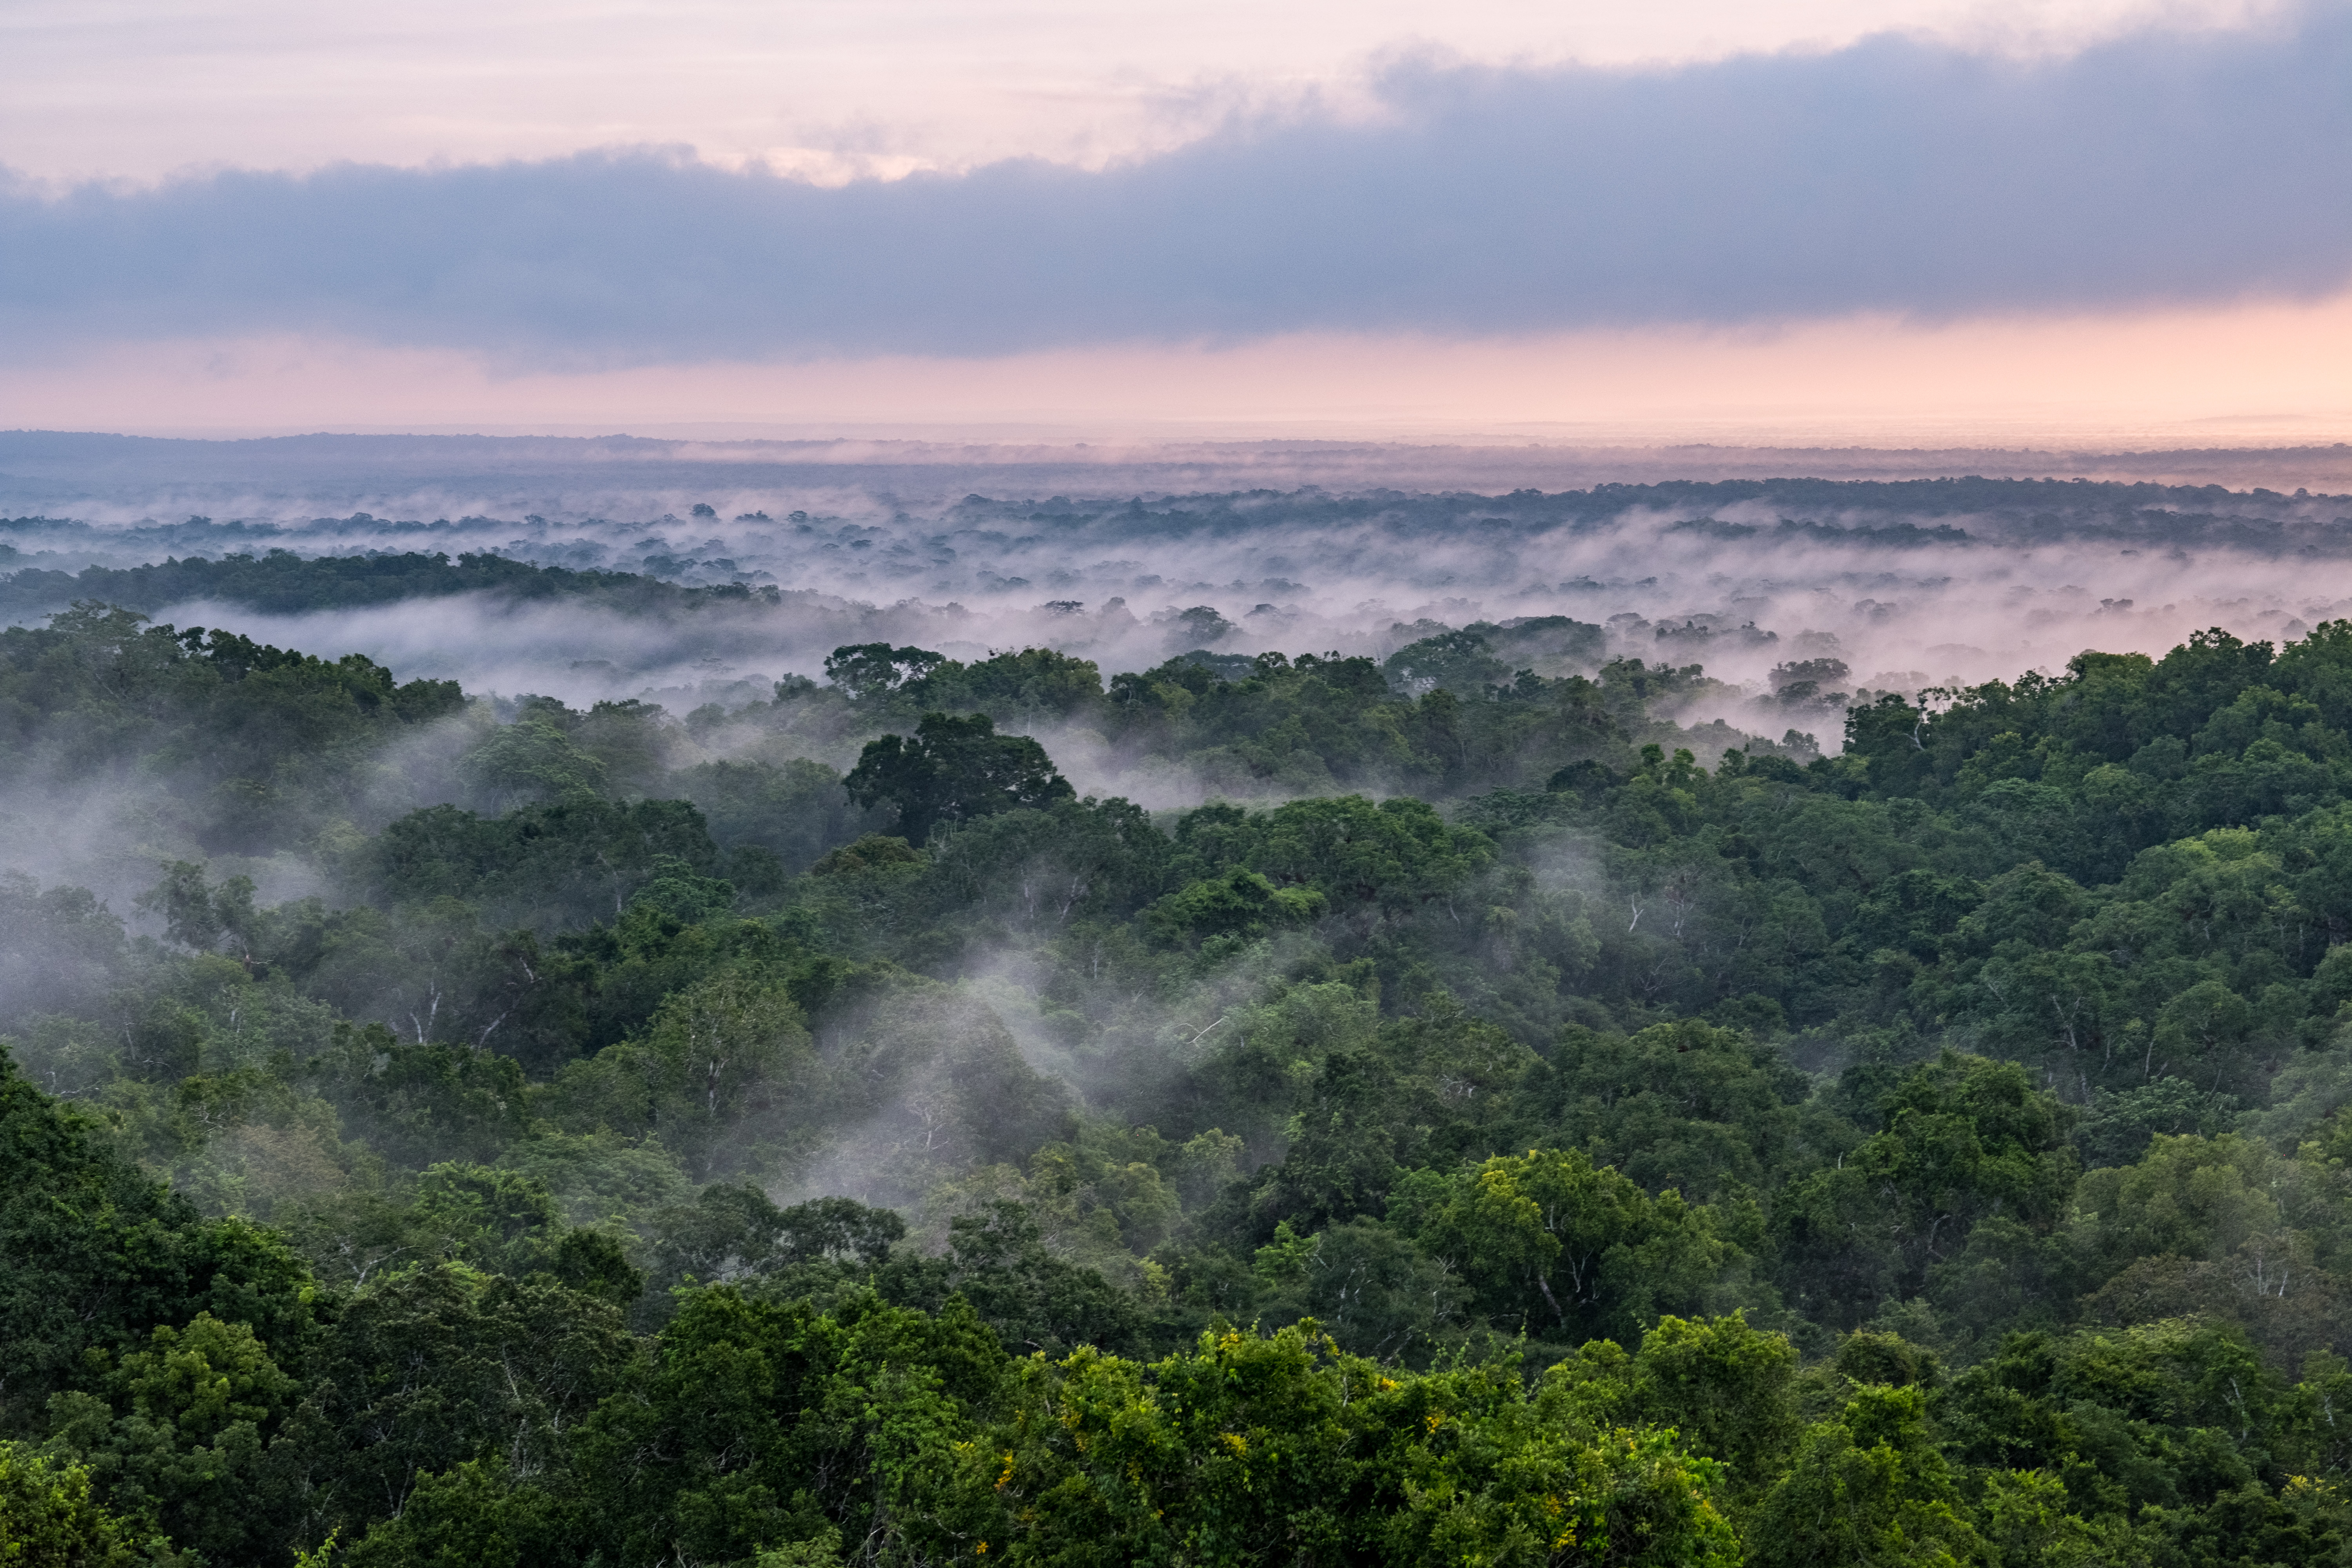  

NISAR will use radar to study changes in ecosystems around the world, such as this forest in Tikal National Park in northern Guatemala, to understand how these areas are affected by climate change and human activity, and the role they play in the global carbon cycle.

Credit: USAID
